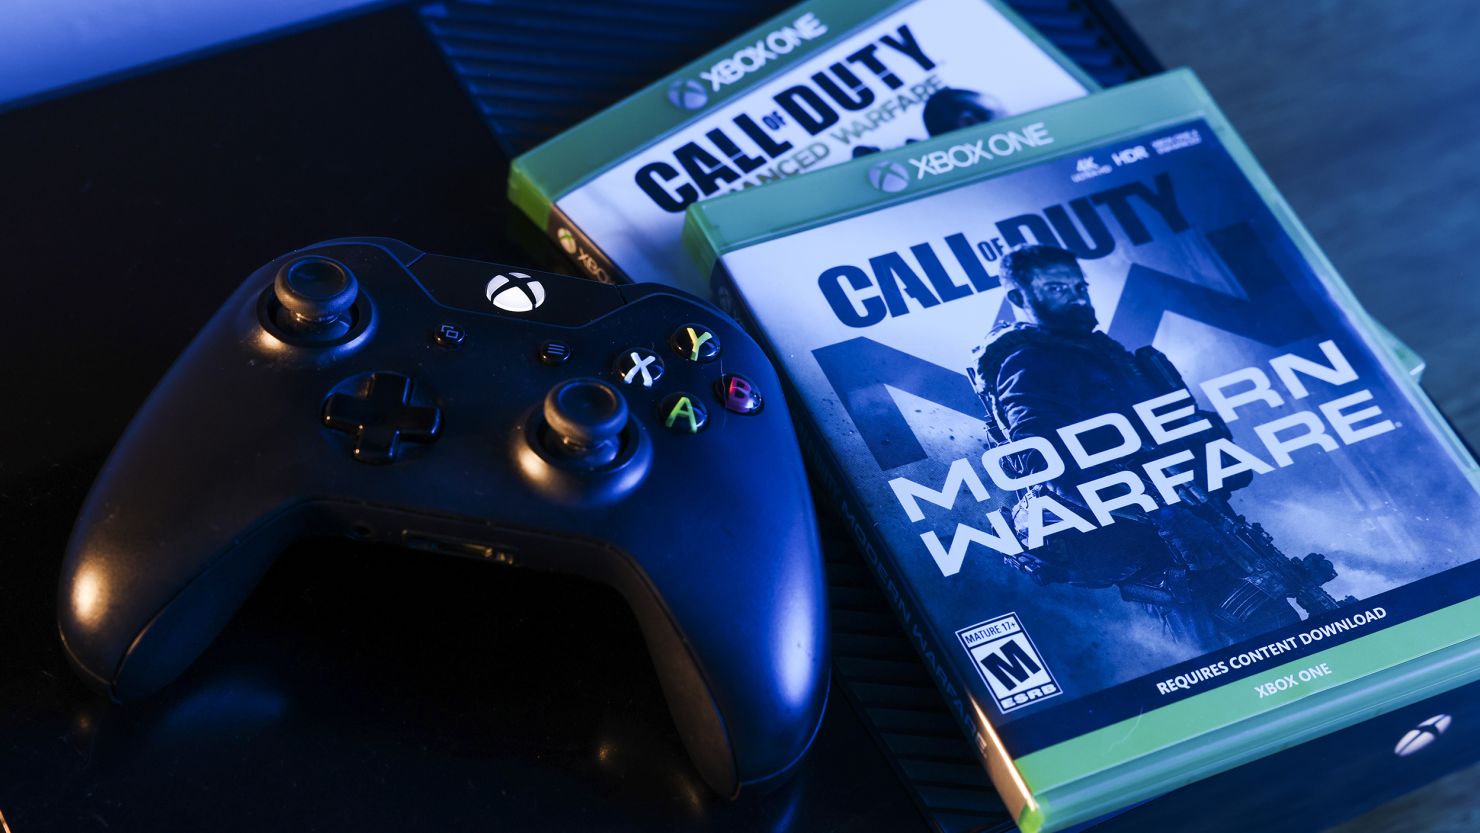 Game Pass set to dominate as #Microsoft monopoly grows. #blizzard #gaming  #industry #news #activision